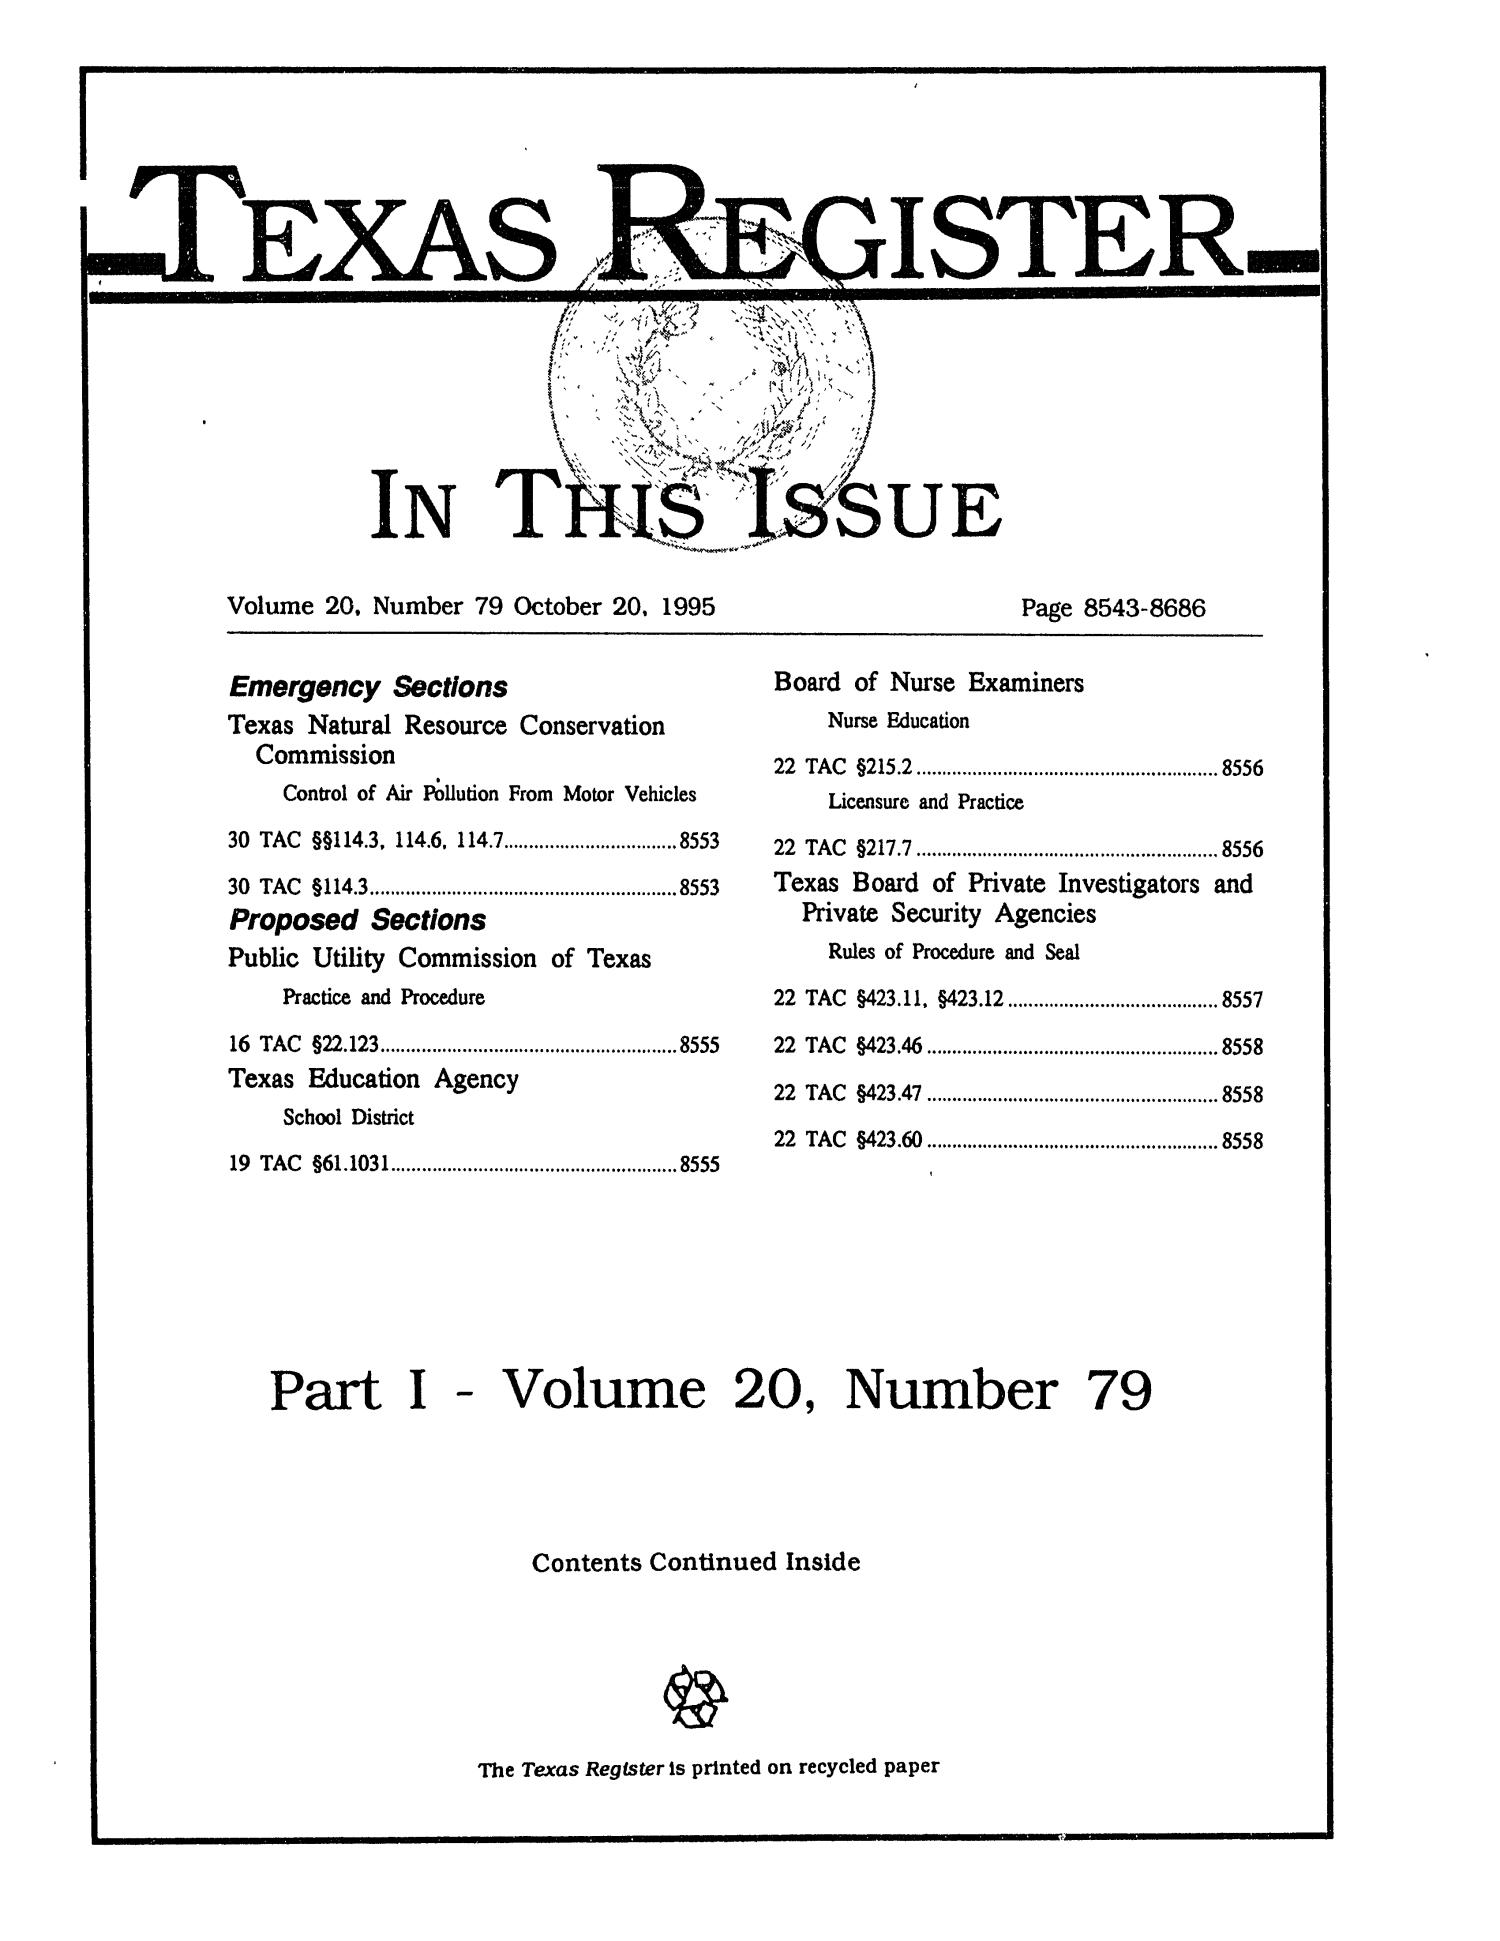 Texas Register, Volume 20, Number 79, Part I, Pages 8543-8686, October 20, 1995
                                                
                                                    Title Page
                                                